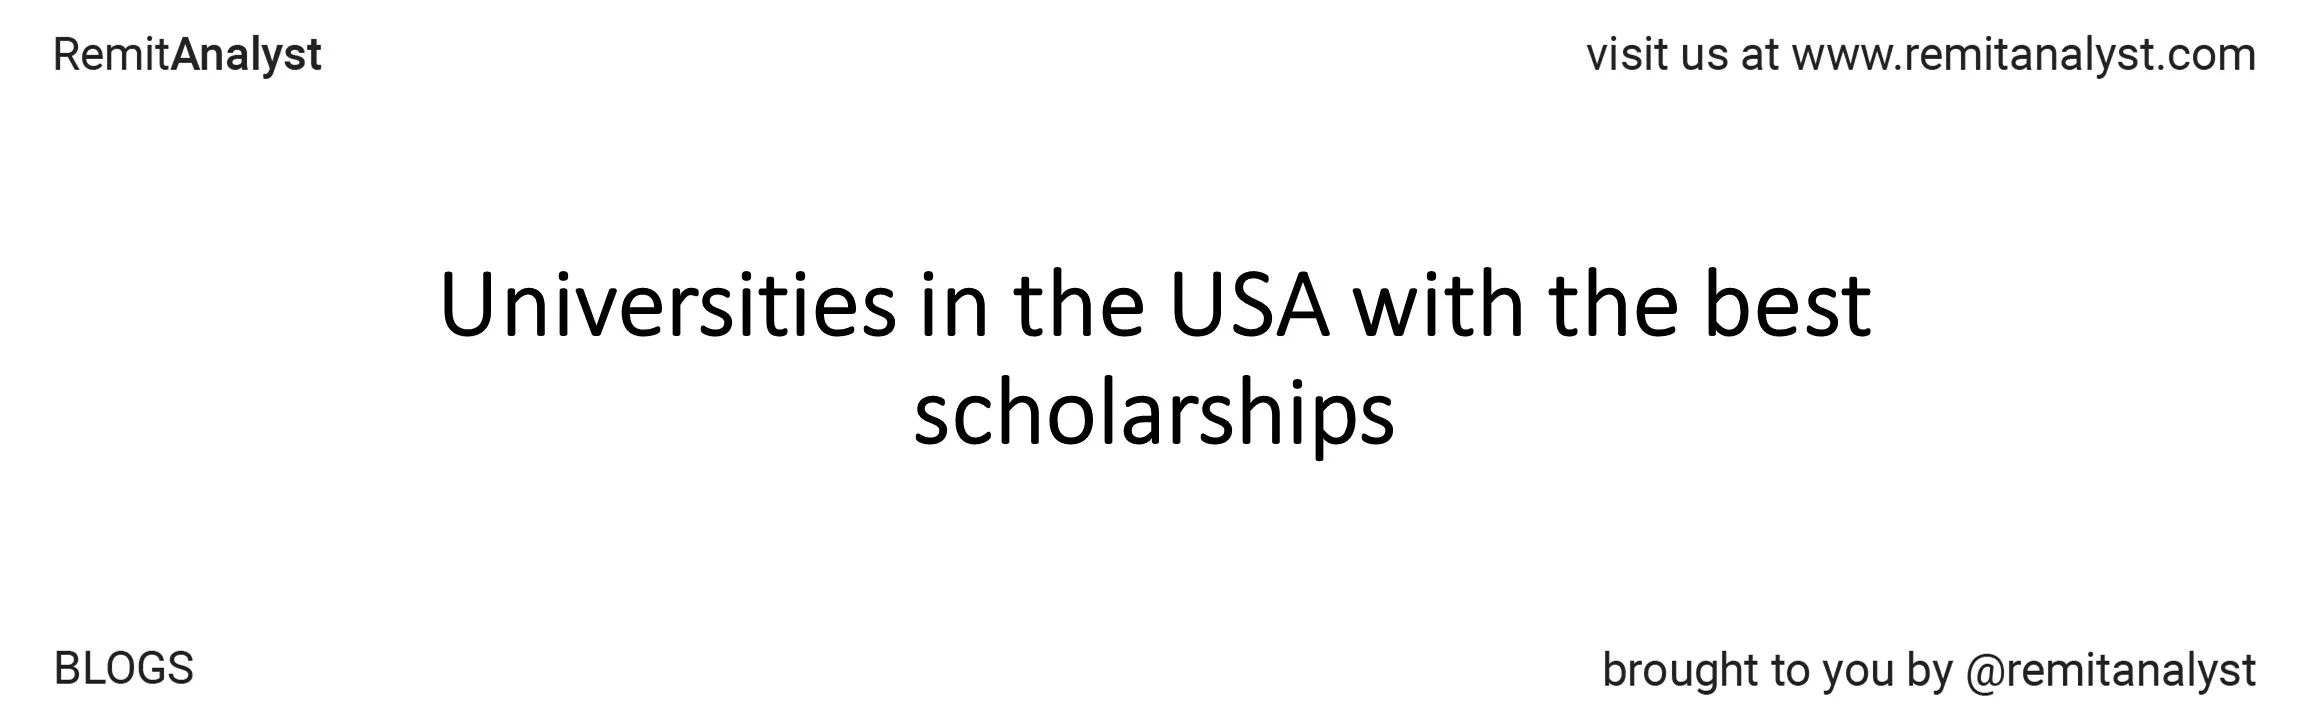 usa-universities-with-best-scholarship-title